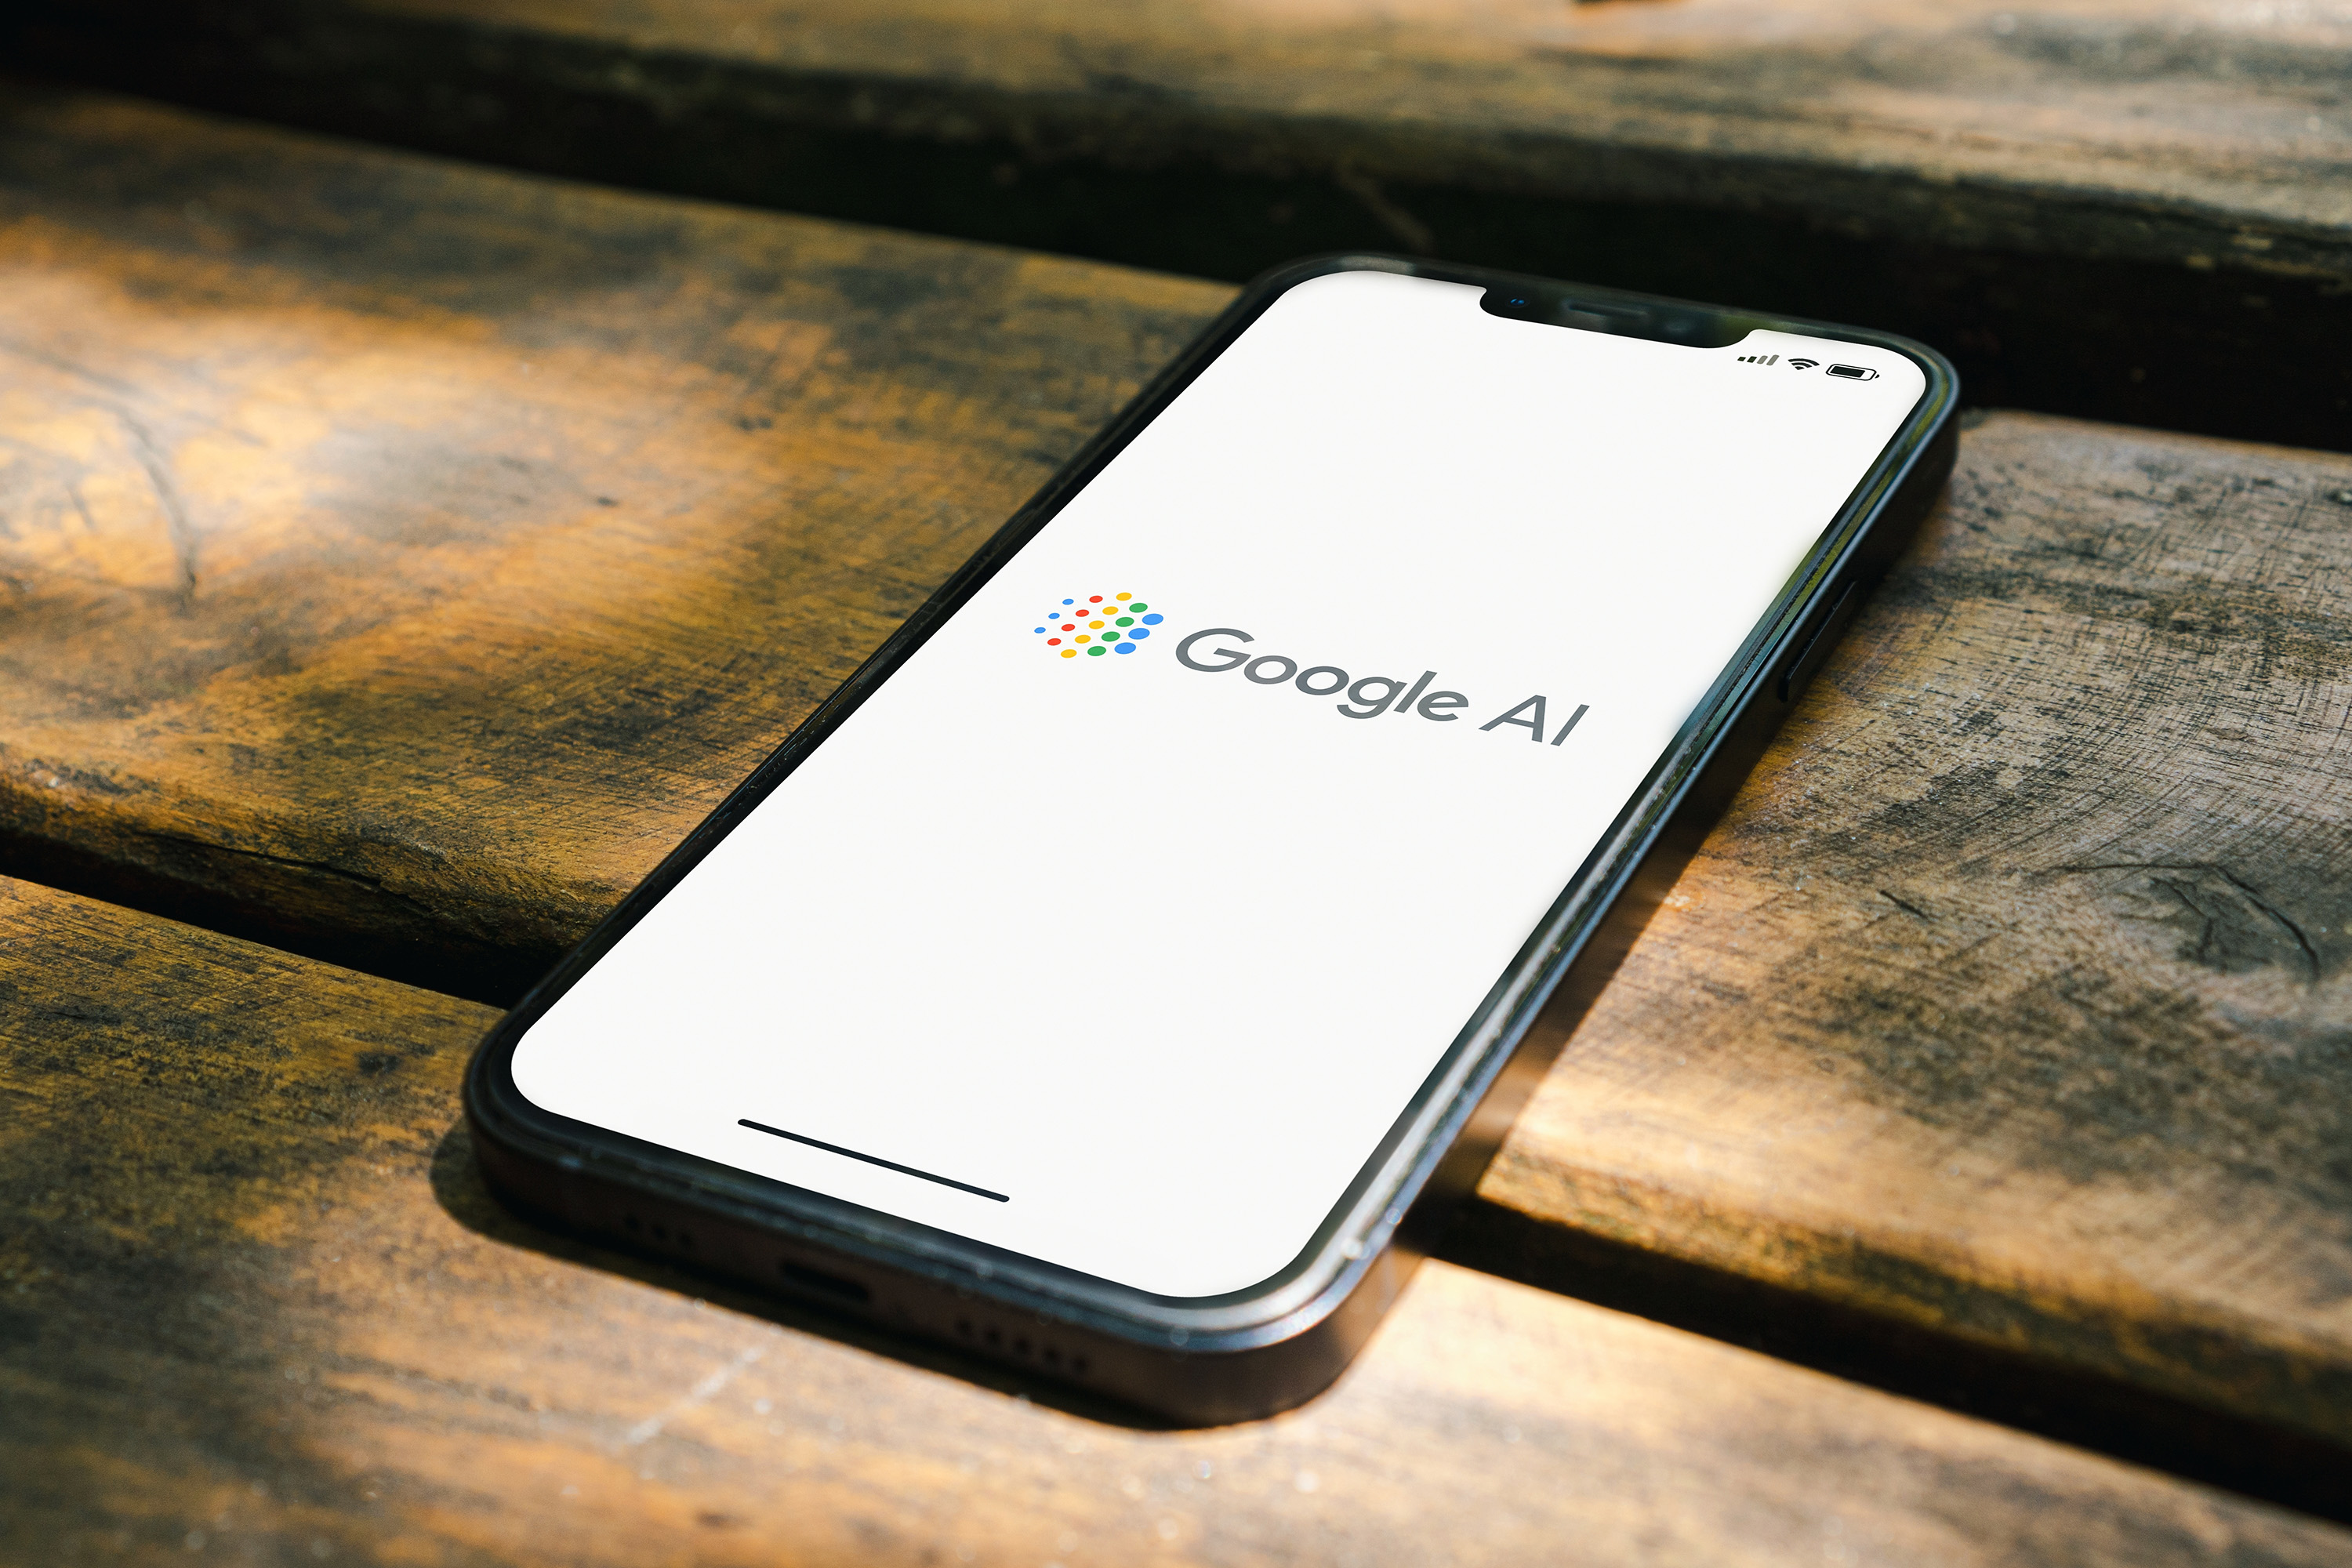 Google AI logo on phone laying on a table